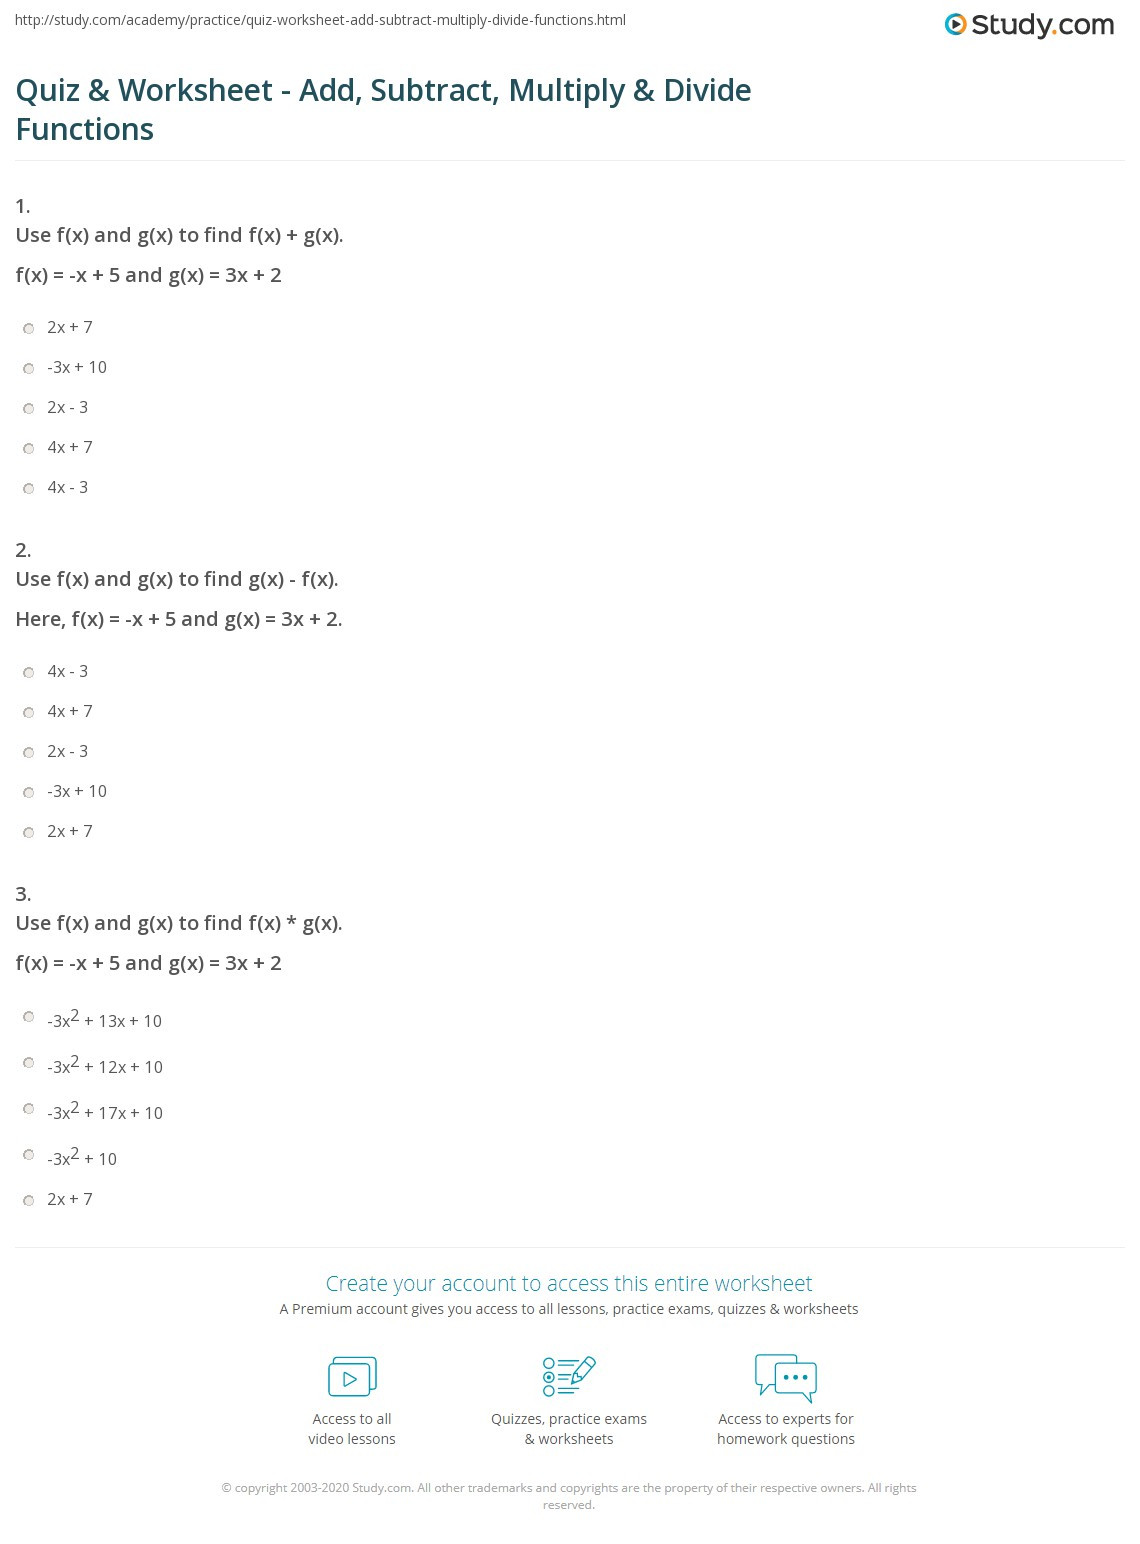 Operations with Functions Worksheet Quiz &amp; Worksheet Add Subtract Multiply &amp; Divide